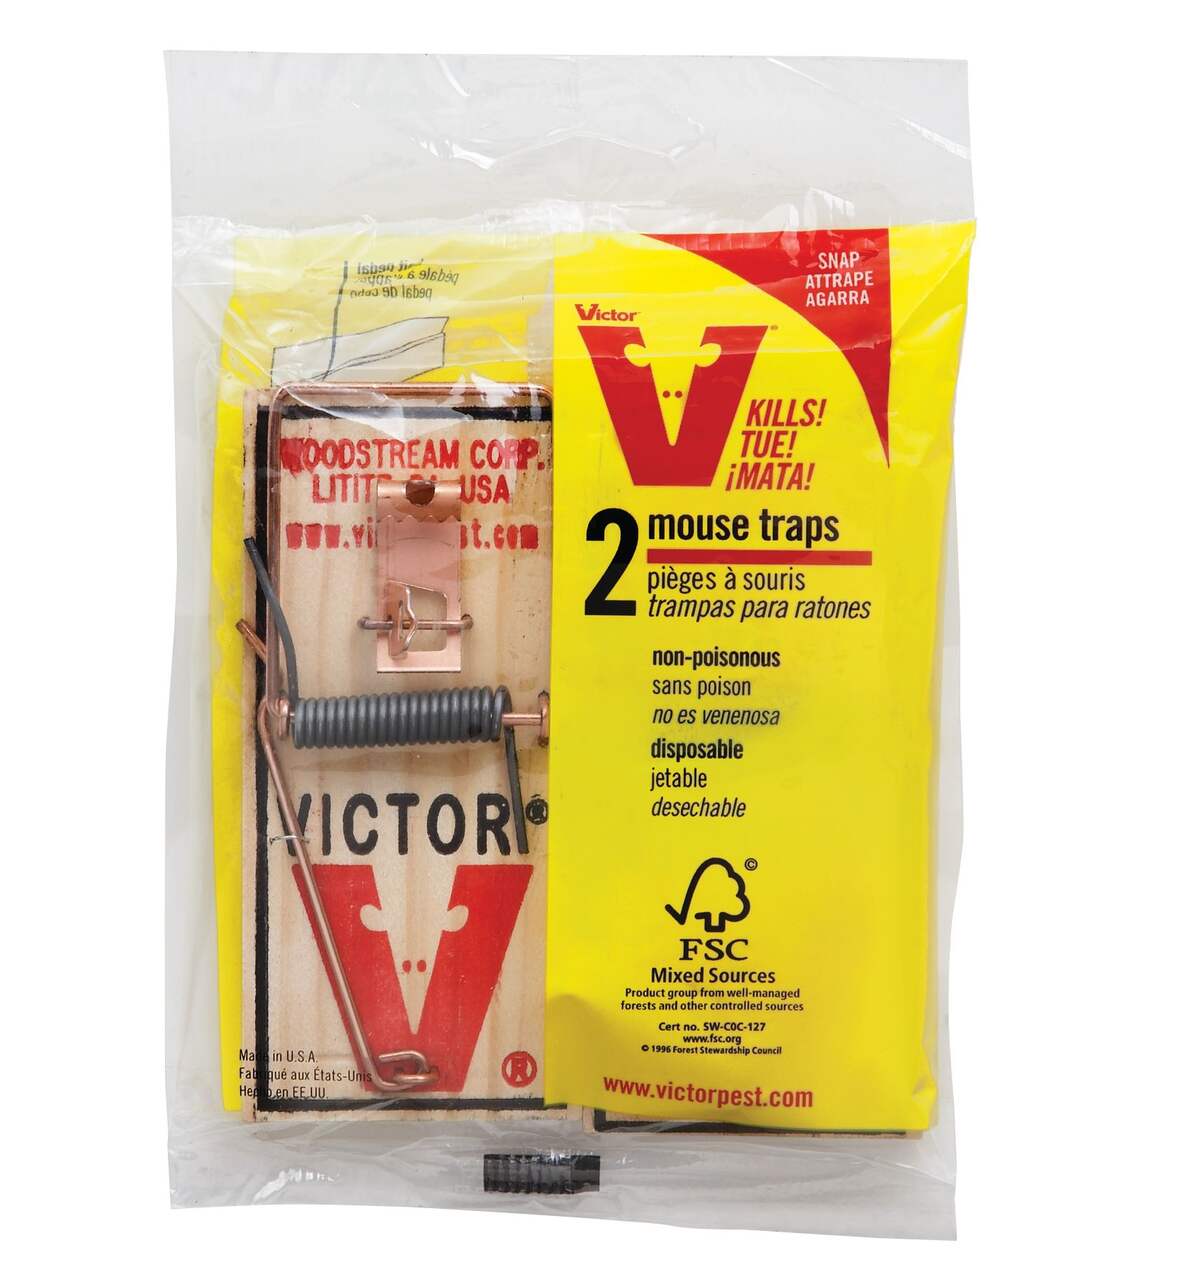 https://media-www.canadiantire.ca/product/seasonal-gardening/gardening/weed-insect-rodent-control/0593608/victor-mouse-traps-2pk-15200cc9-eecd-4e85-a5af-47cbd3c43633-jpgrendition.jpg?imdensity=1&imwidth=640&impolicy=mZoom